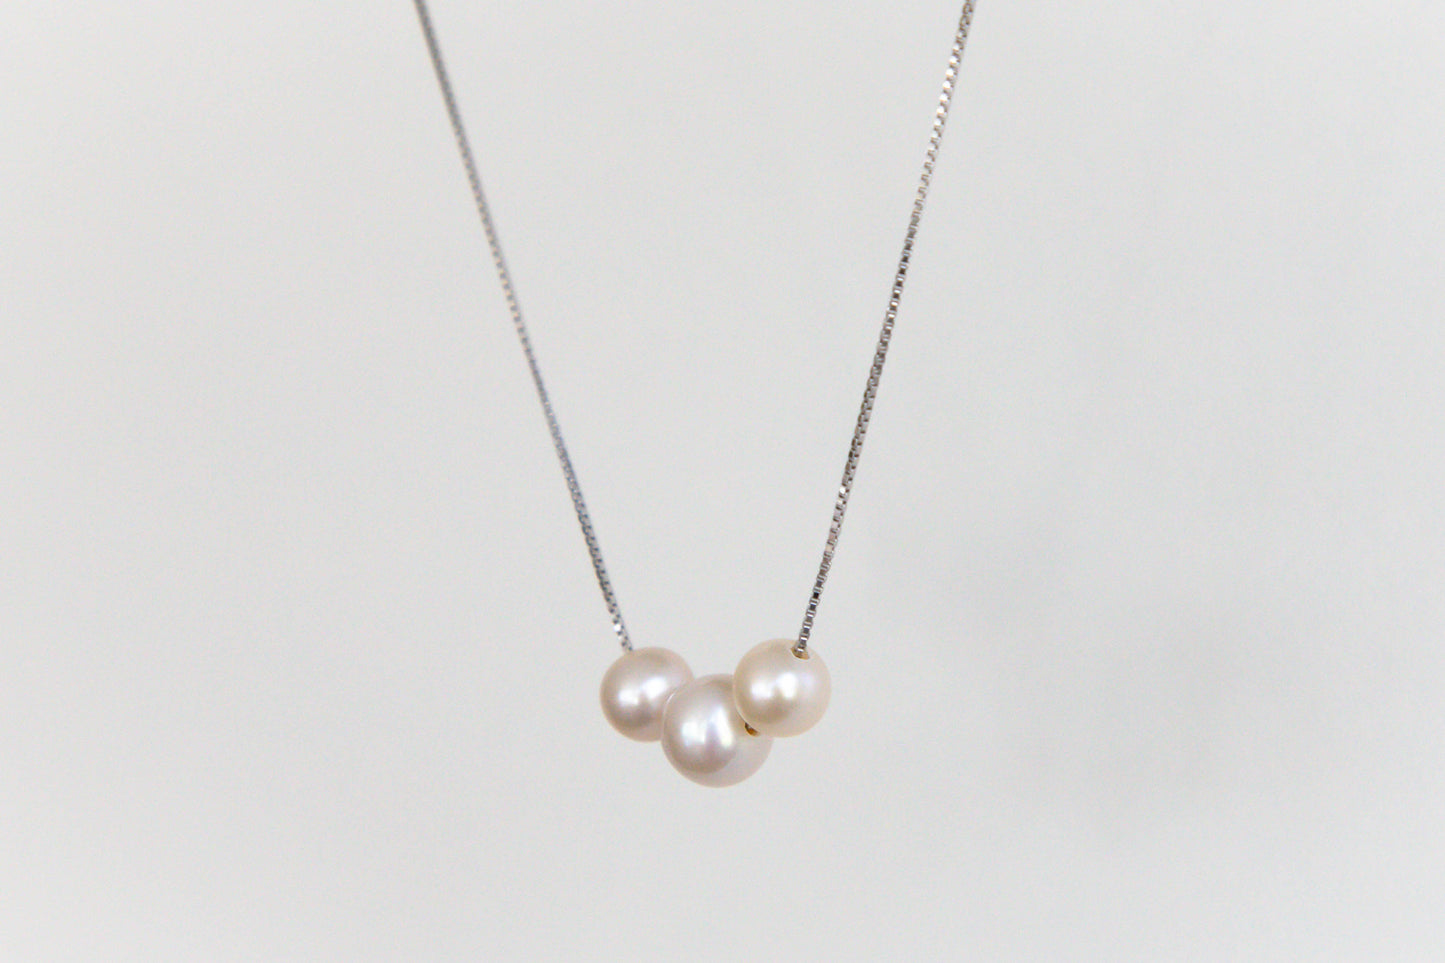 Courage Necklace - Pearls4Girls